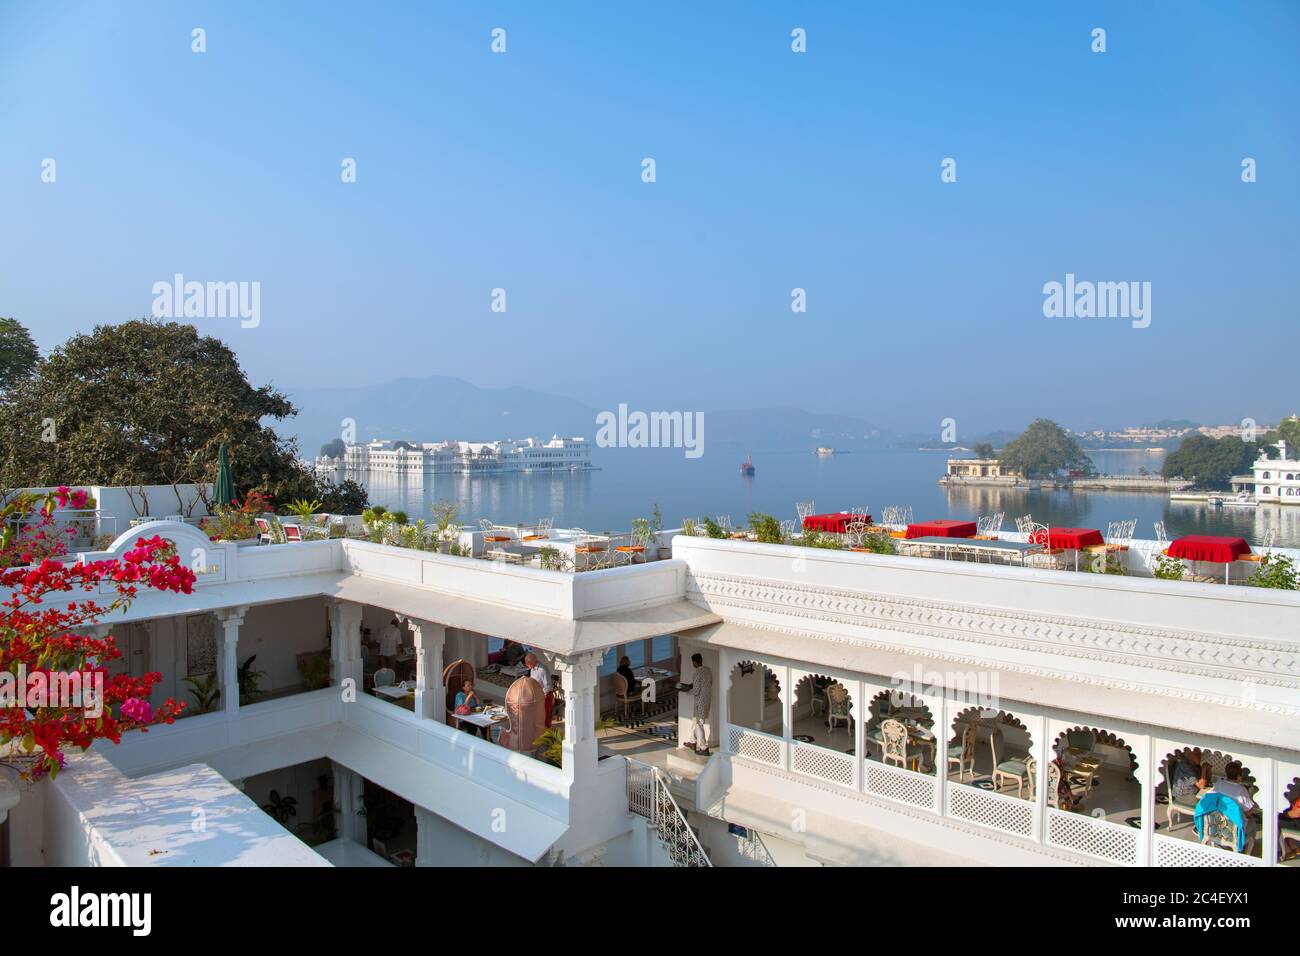 View over Lake Pichola towards the Taj Lake Palace from the Jagat Niwas Palace Hotel in the early morning, Old City, Udaipur, Rajasthan, India Stock Photo